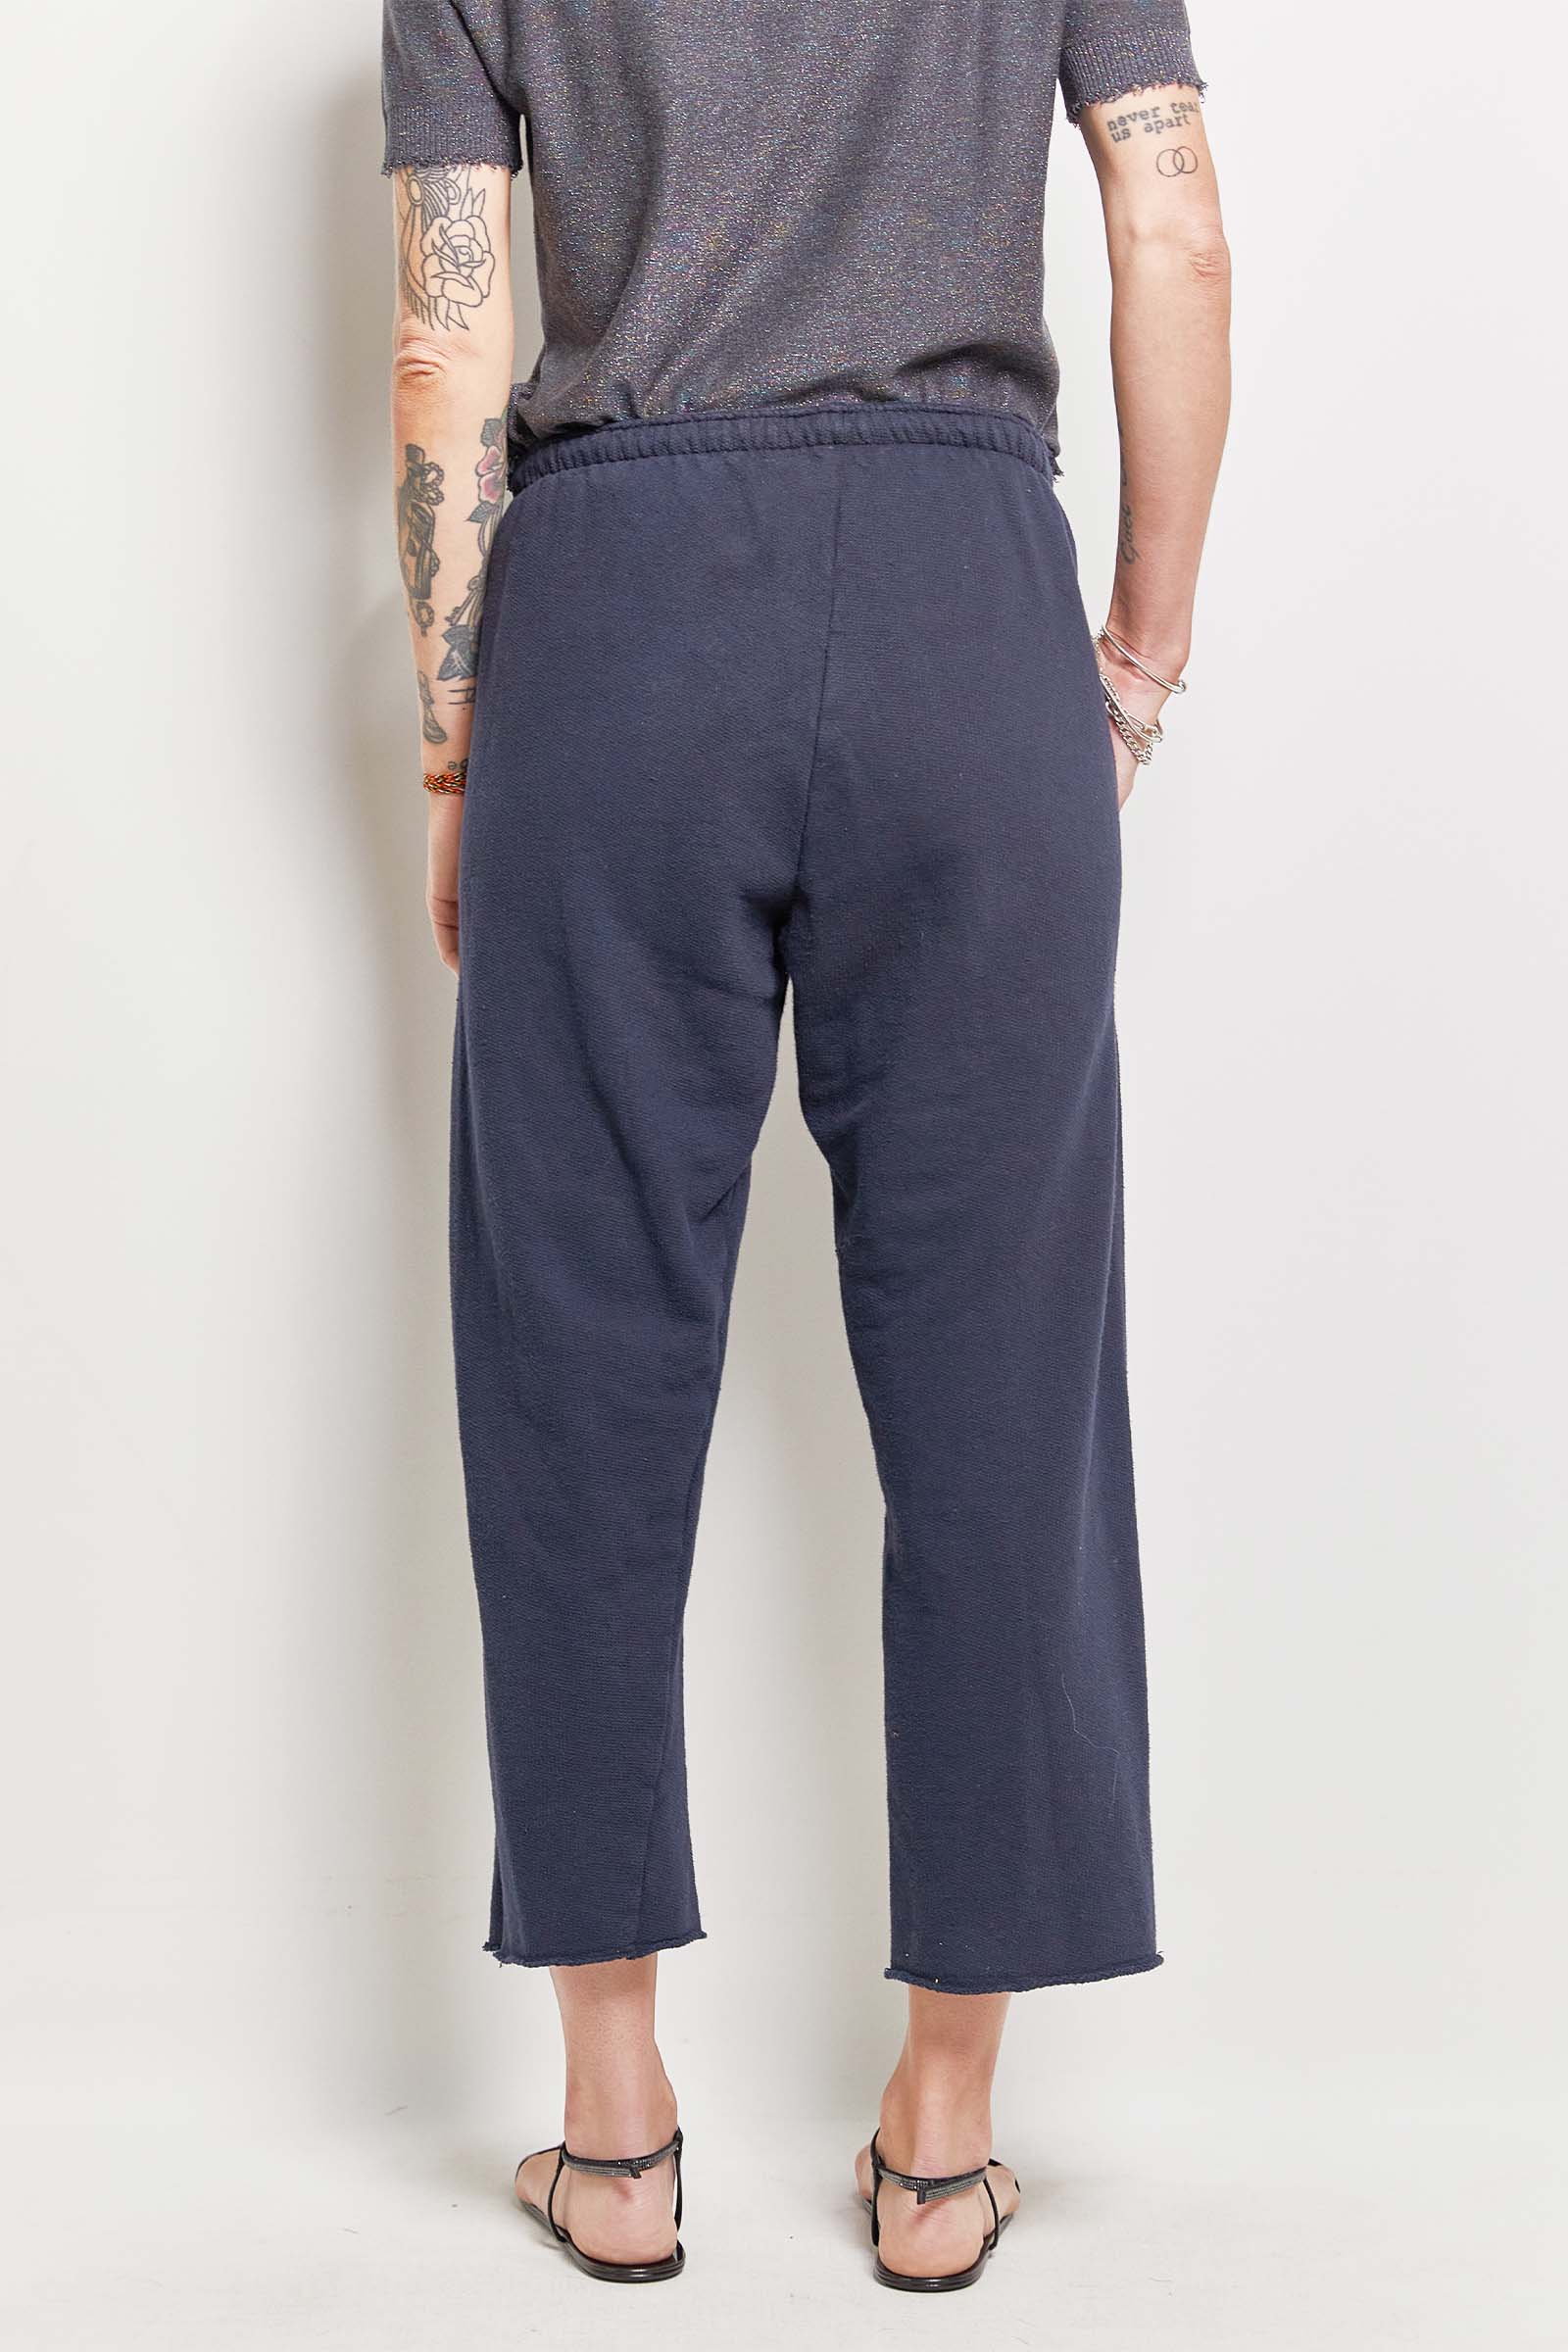 byfreer lazy tracksuit cropped comfy pants.